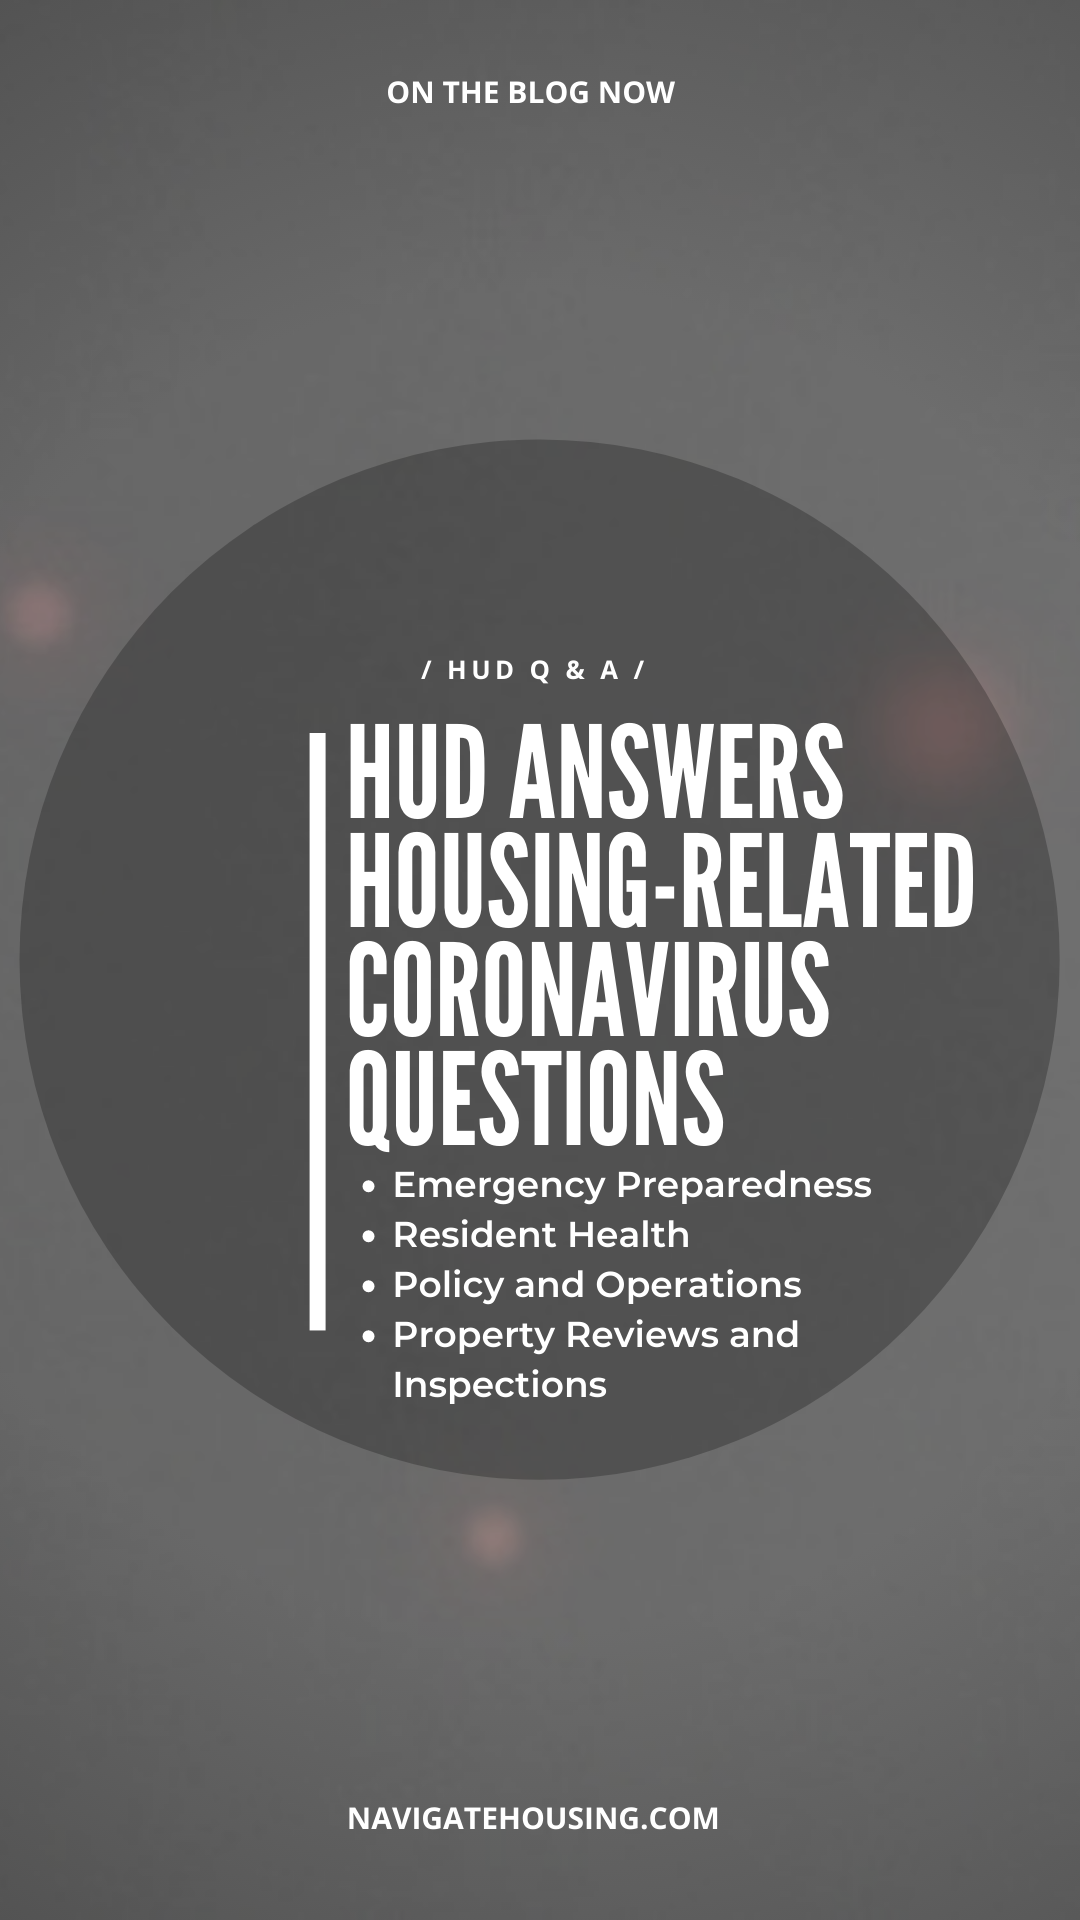 HUD answers housing-related Coronavirus questions